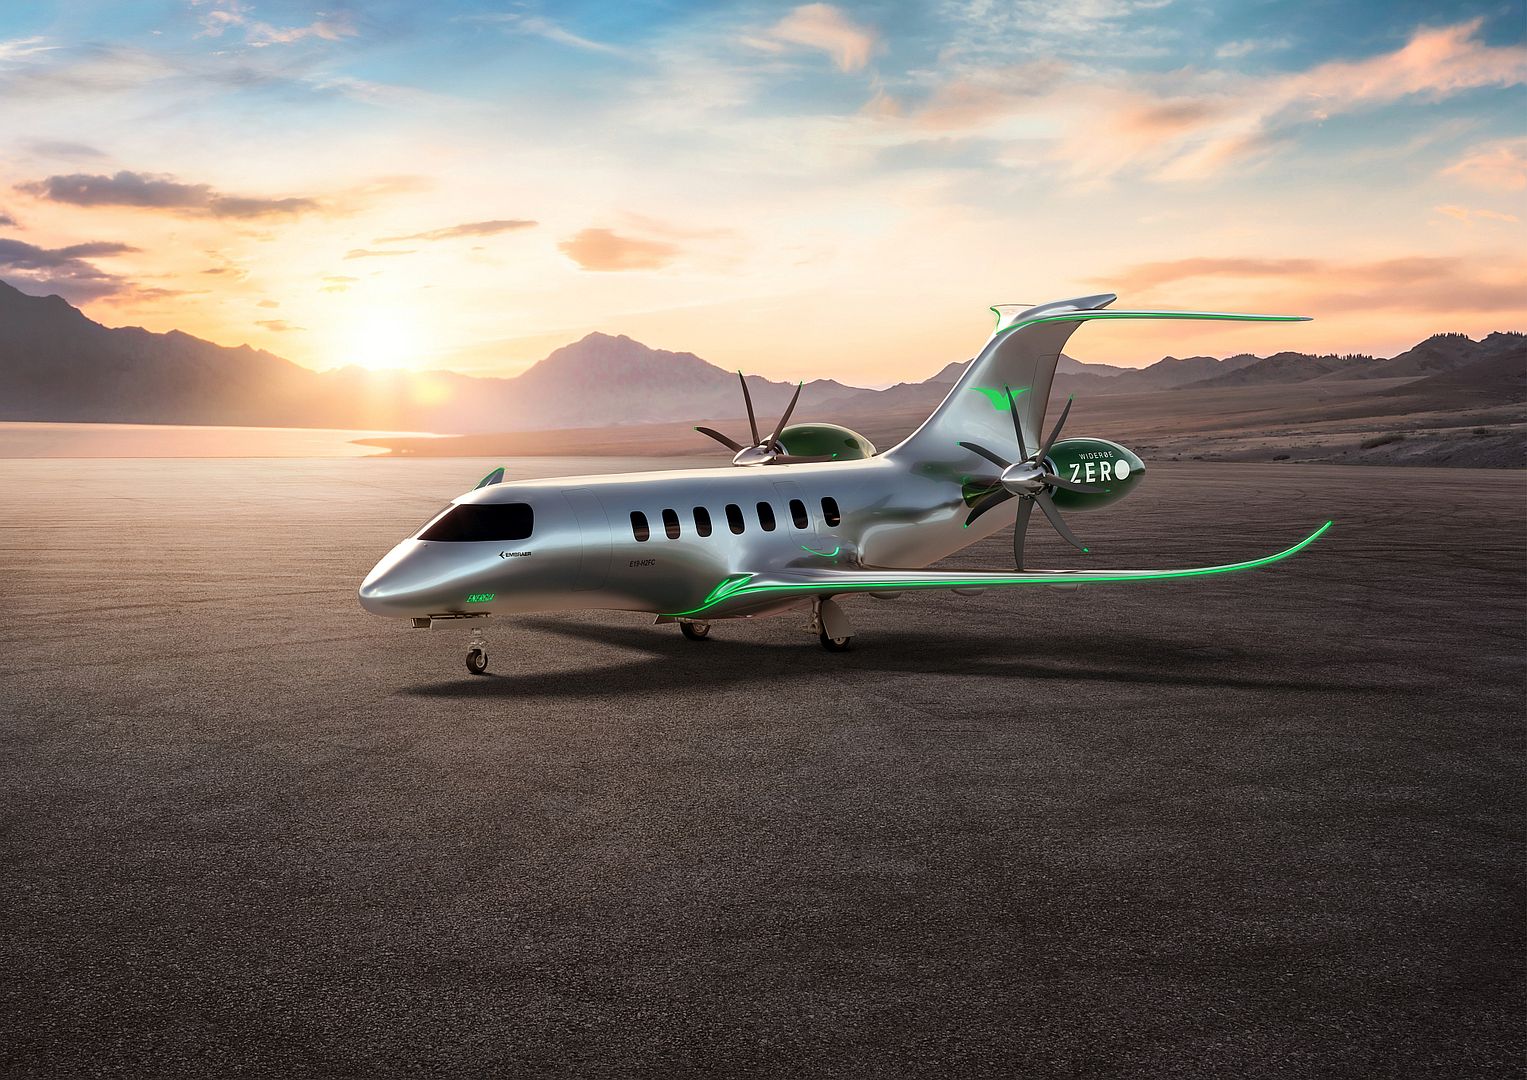 Embraer EnergiaH2FuelCell Wideroe